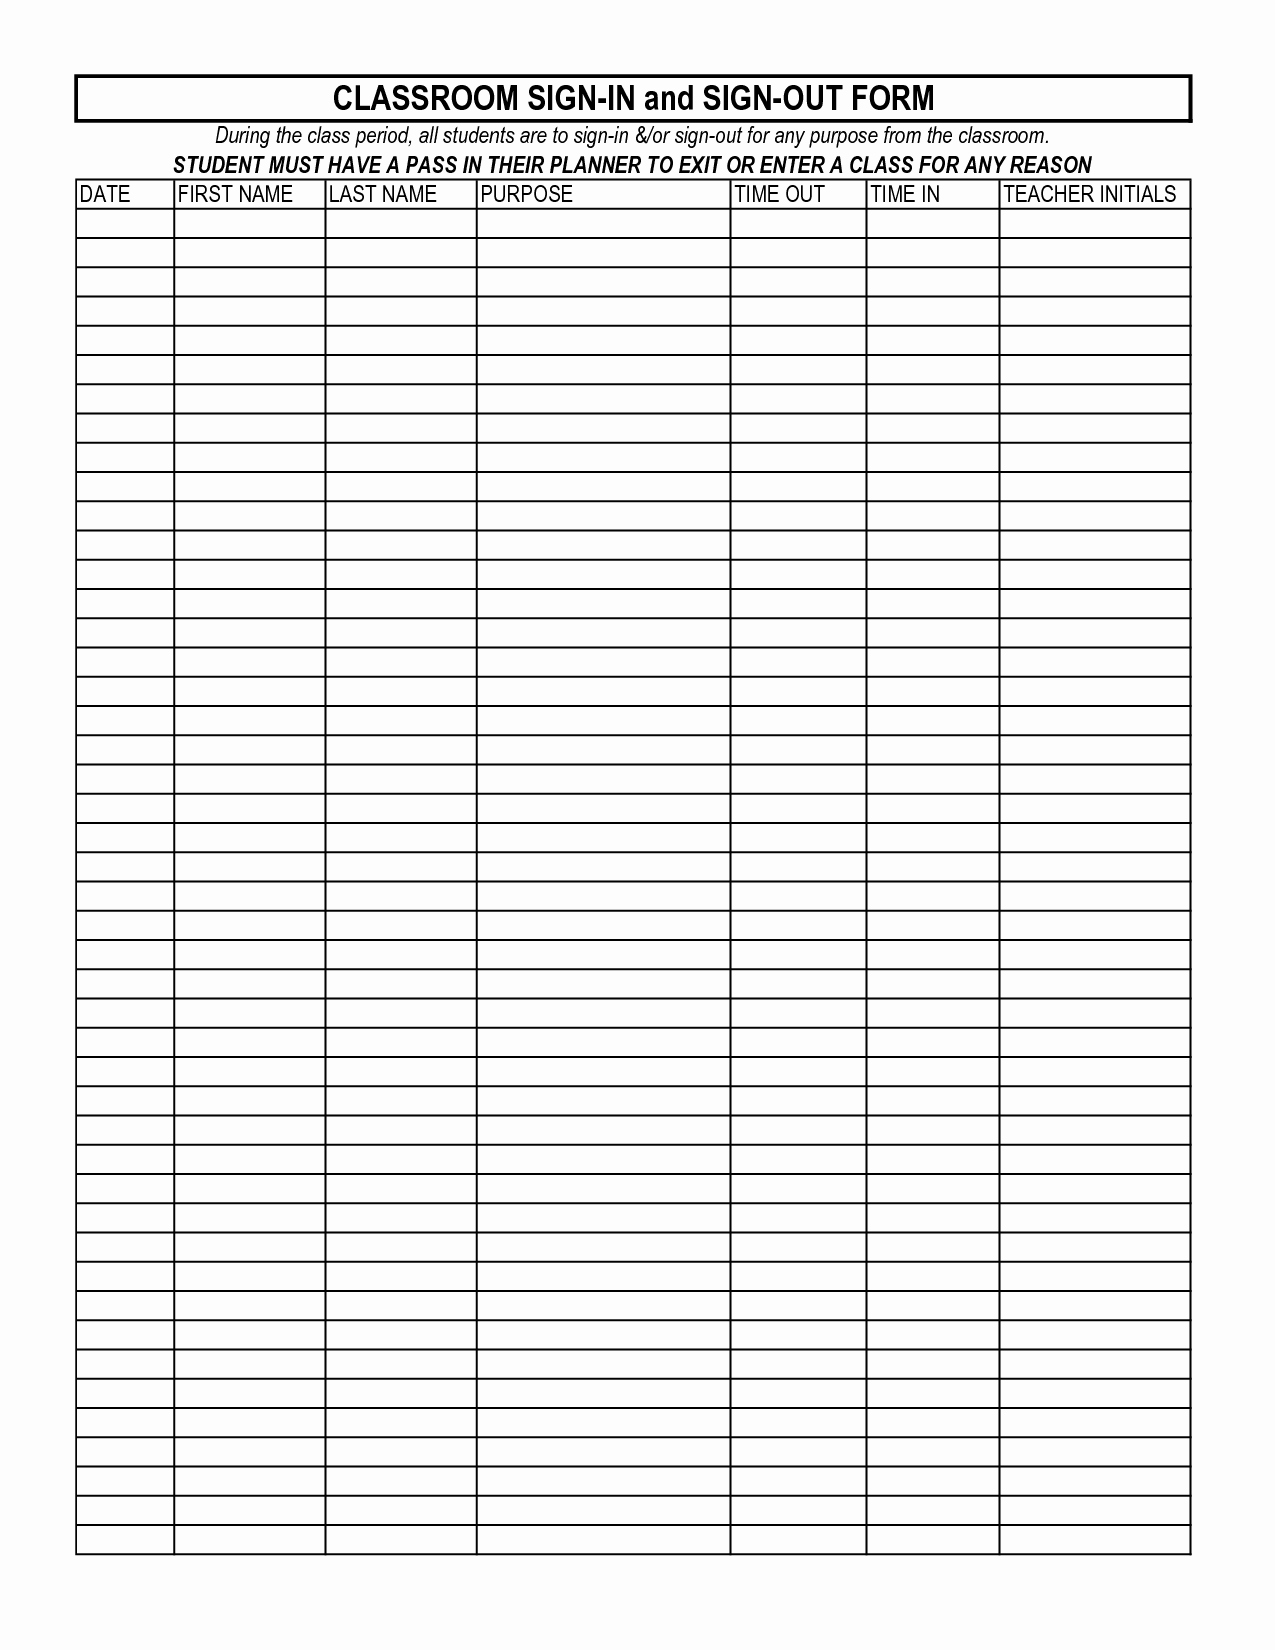 Book Sign Out Sheet Template Luxury Best S Of Classroom Sign Out Sheet Classroom Sign